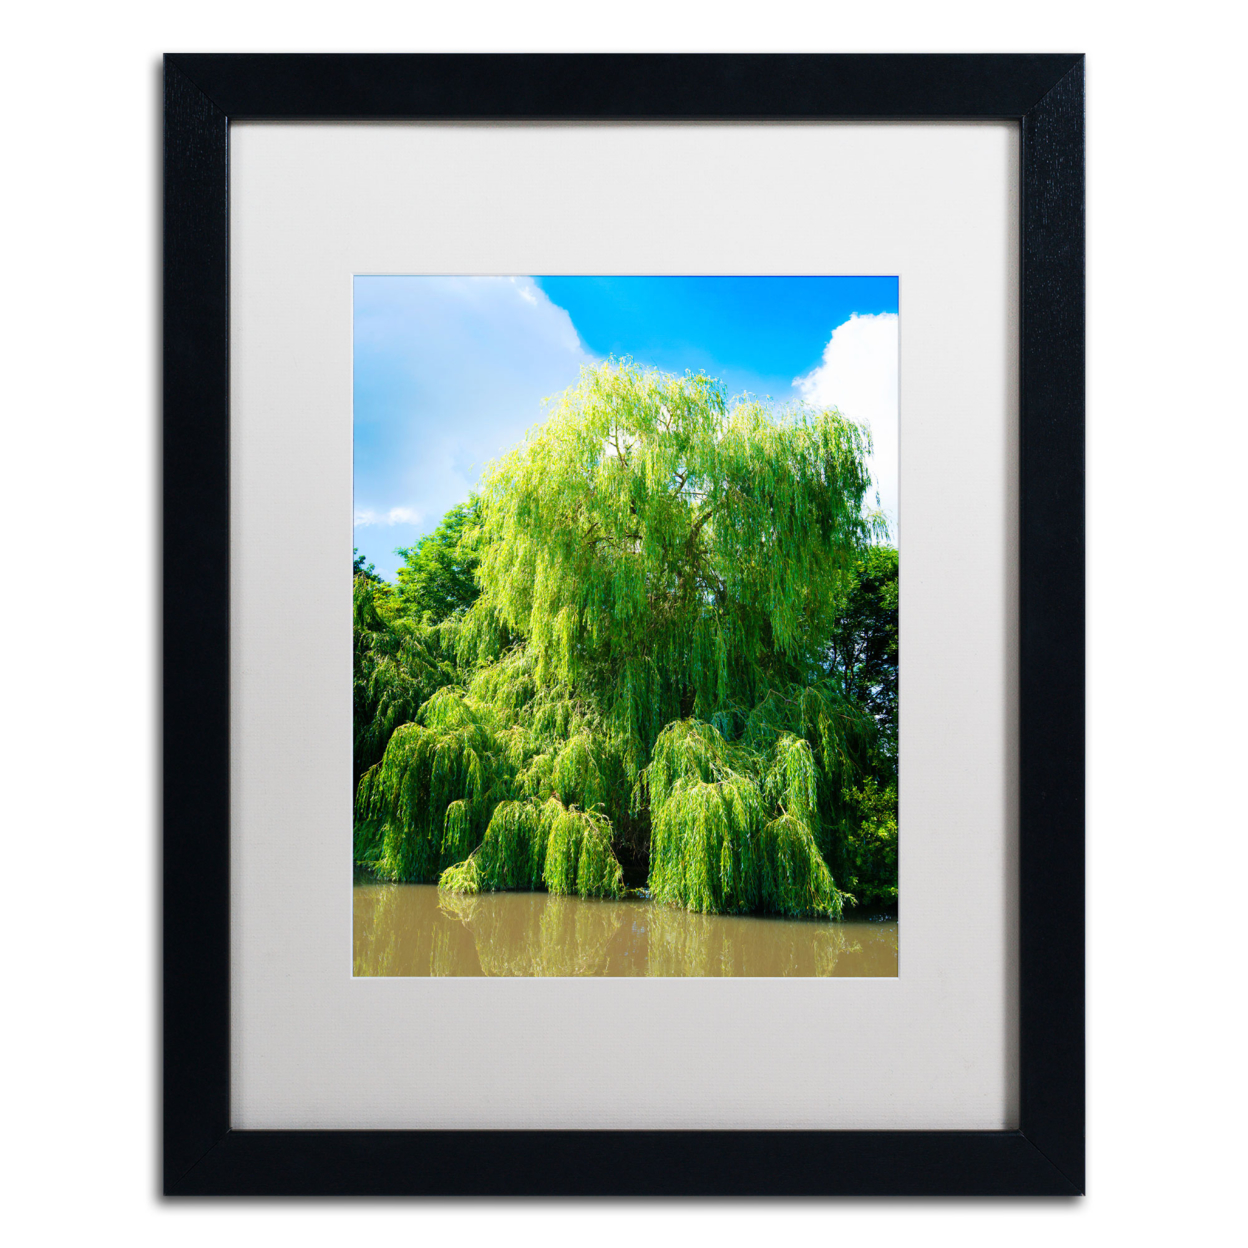 Philippe Sainte-Laudy 'Weeping Willow' Black Wooden Framed Art 18 X 22 Inches